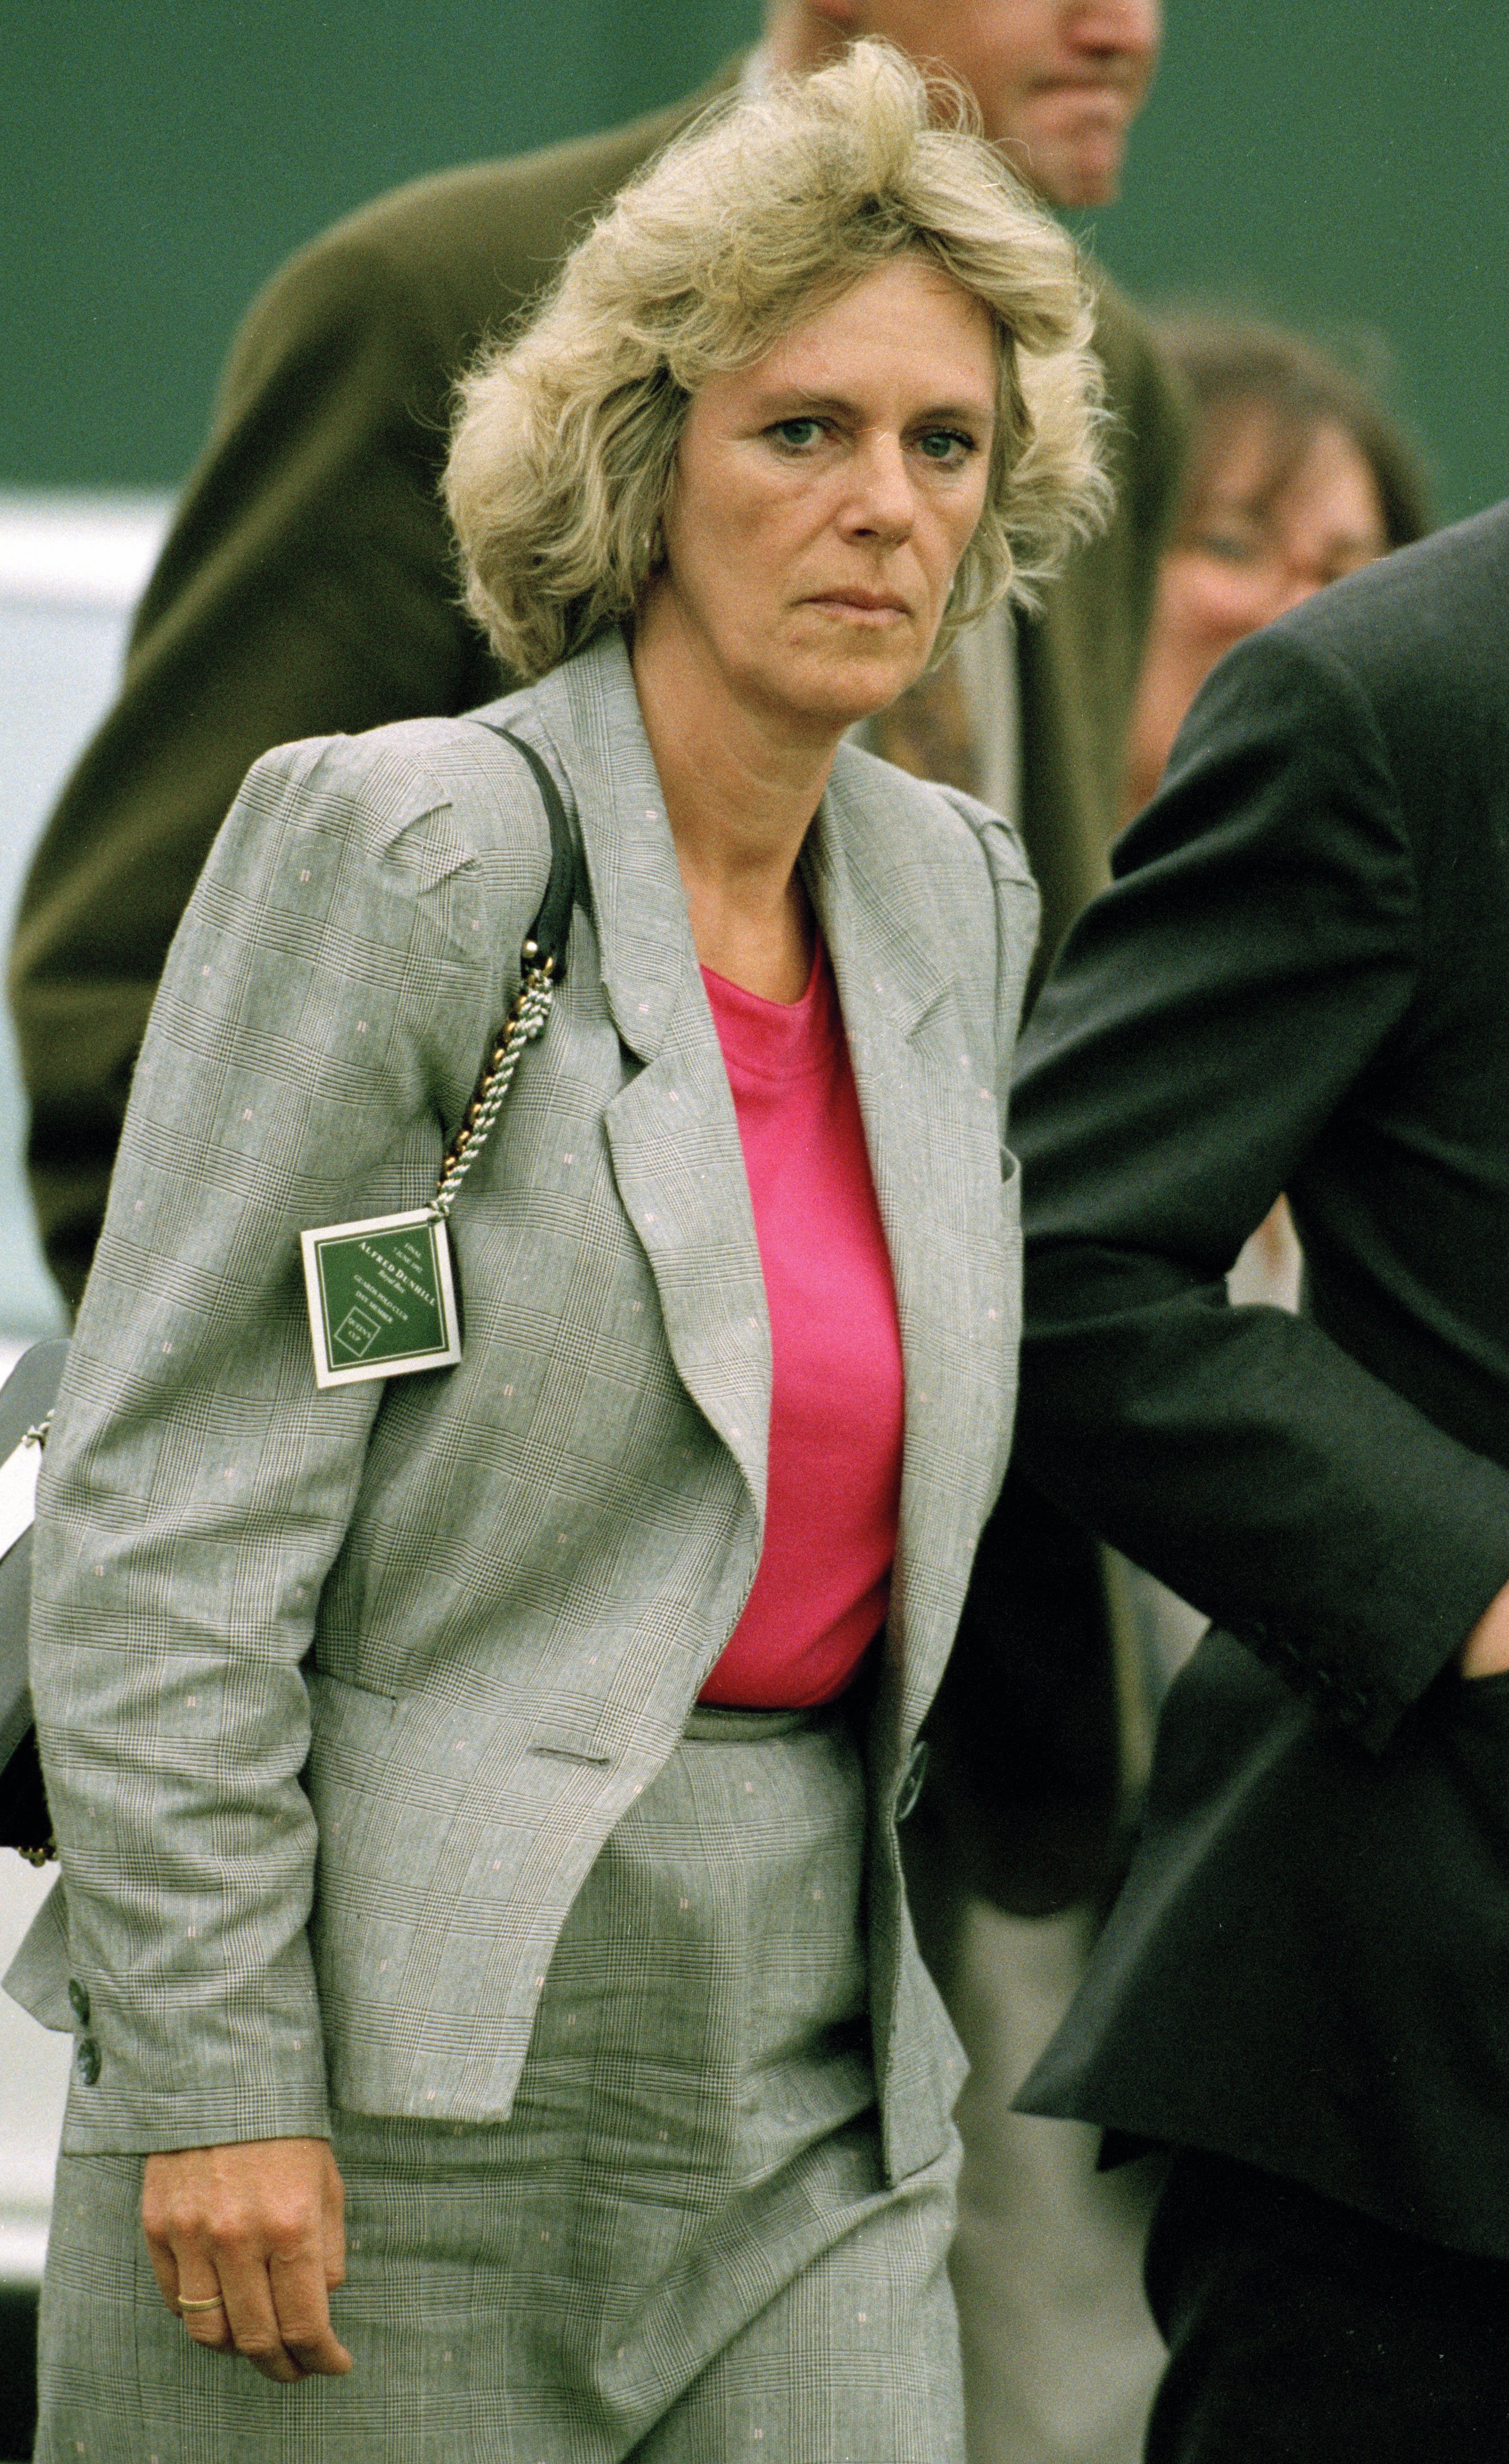 Queens Cup Final at Guards Polo Club, Windsor, Lady Camilla Parker-Bowles. | Source: Getty Images